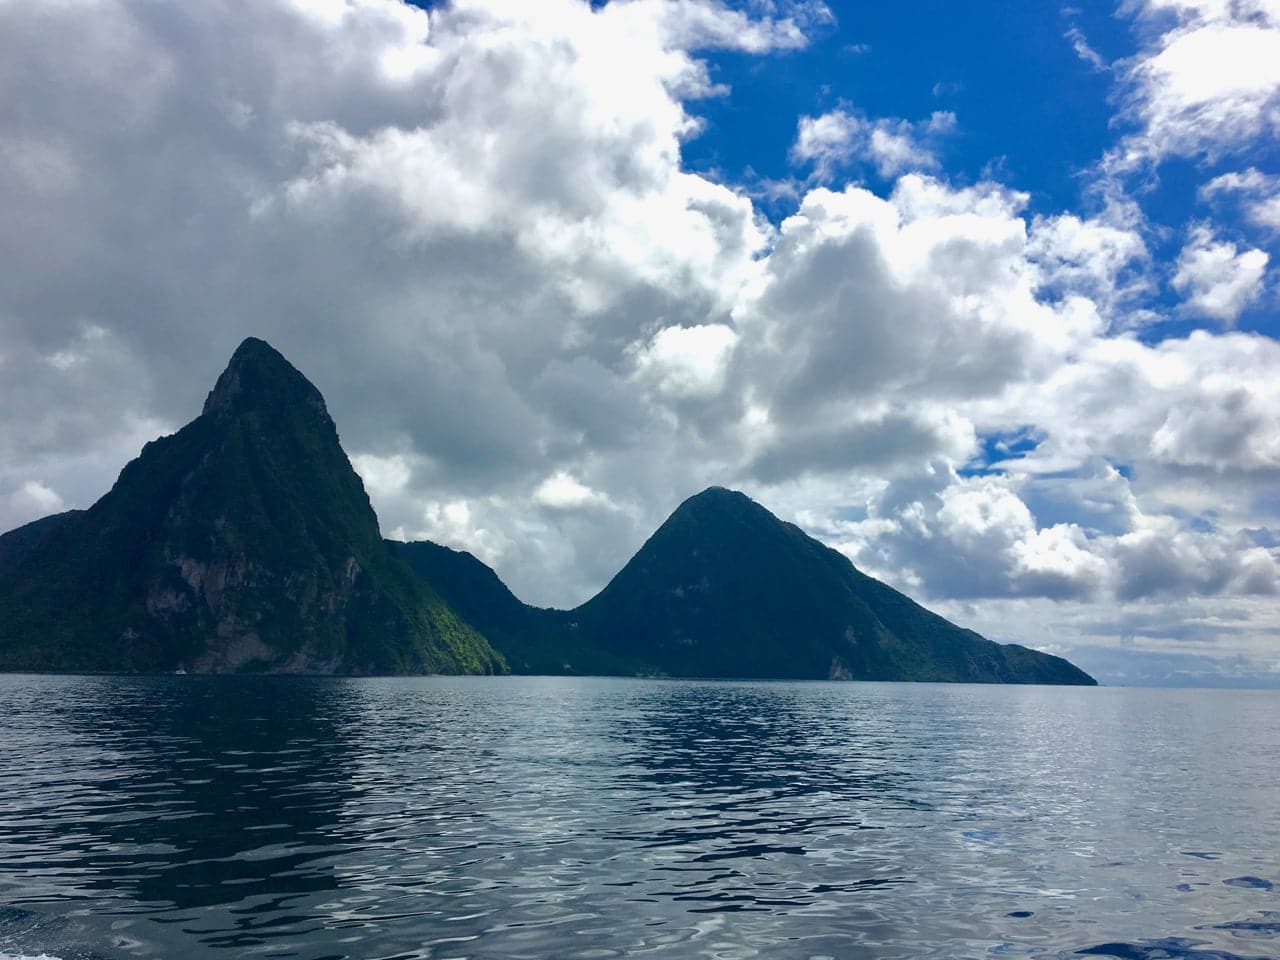 The Pitons rise dramatically off the coast of Saint Lucia, one of the greenest islands visited on the Southern Caribbean Cruise.